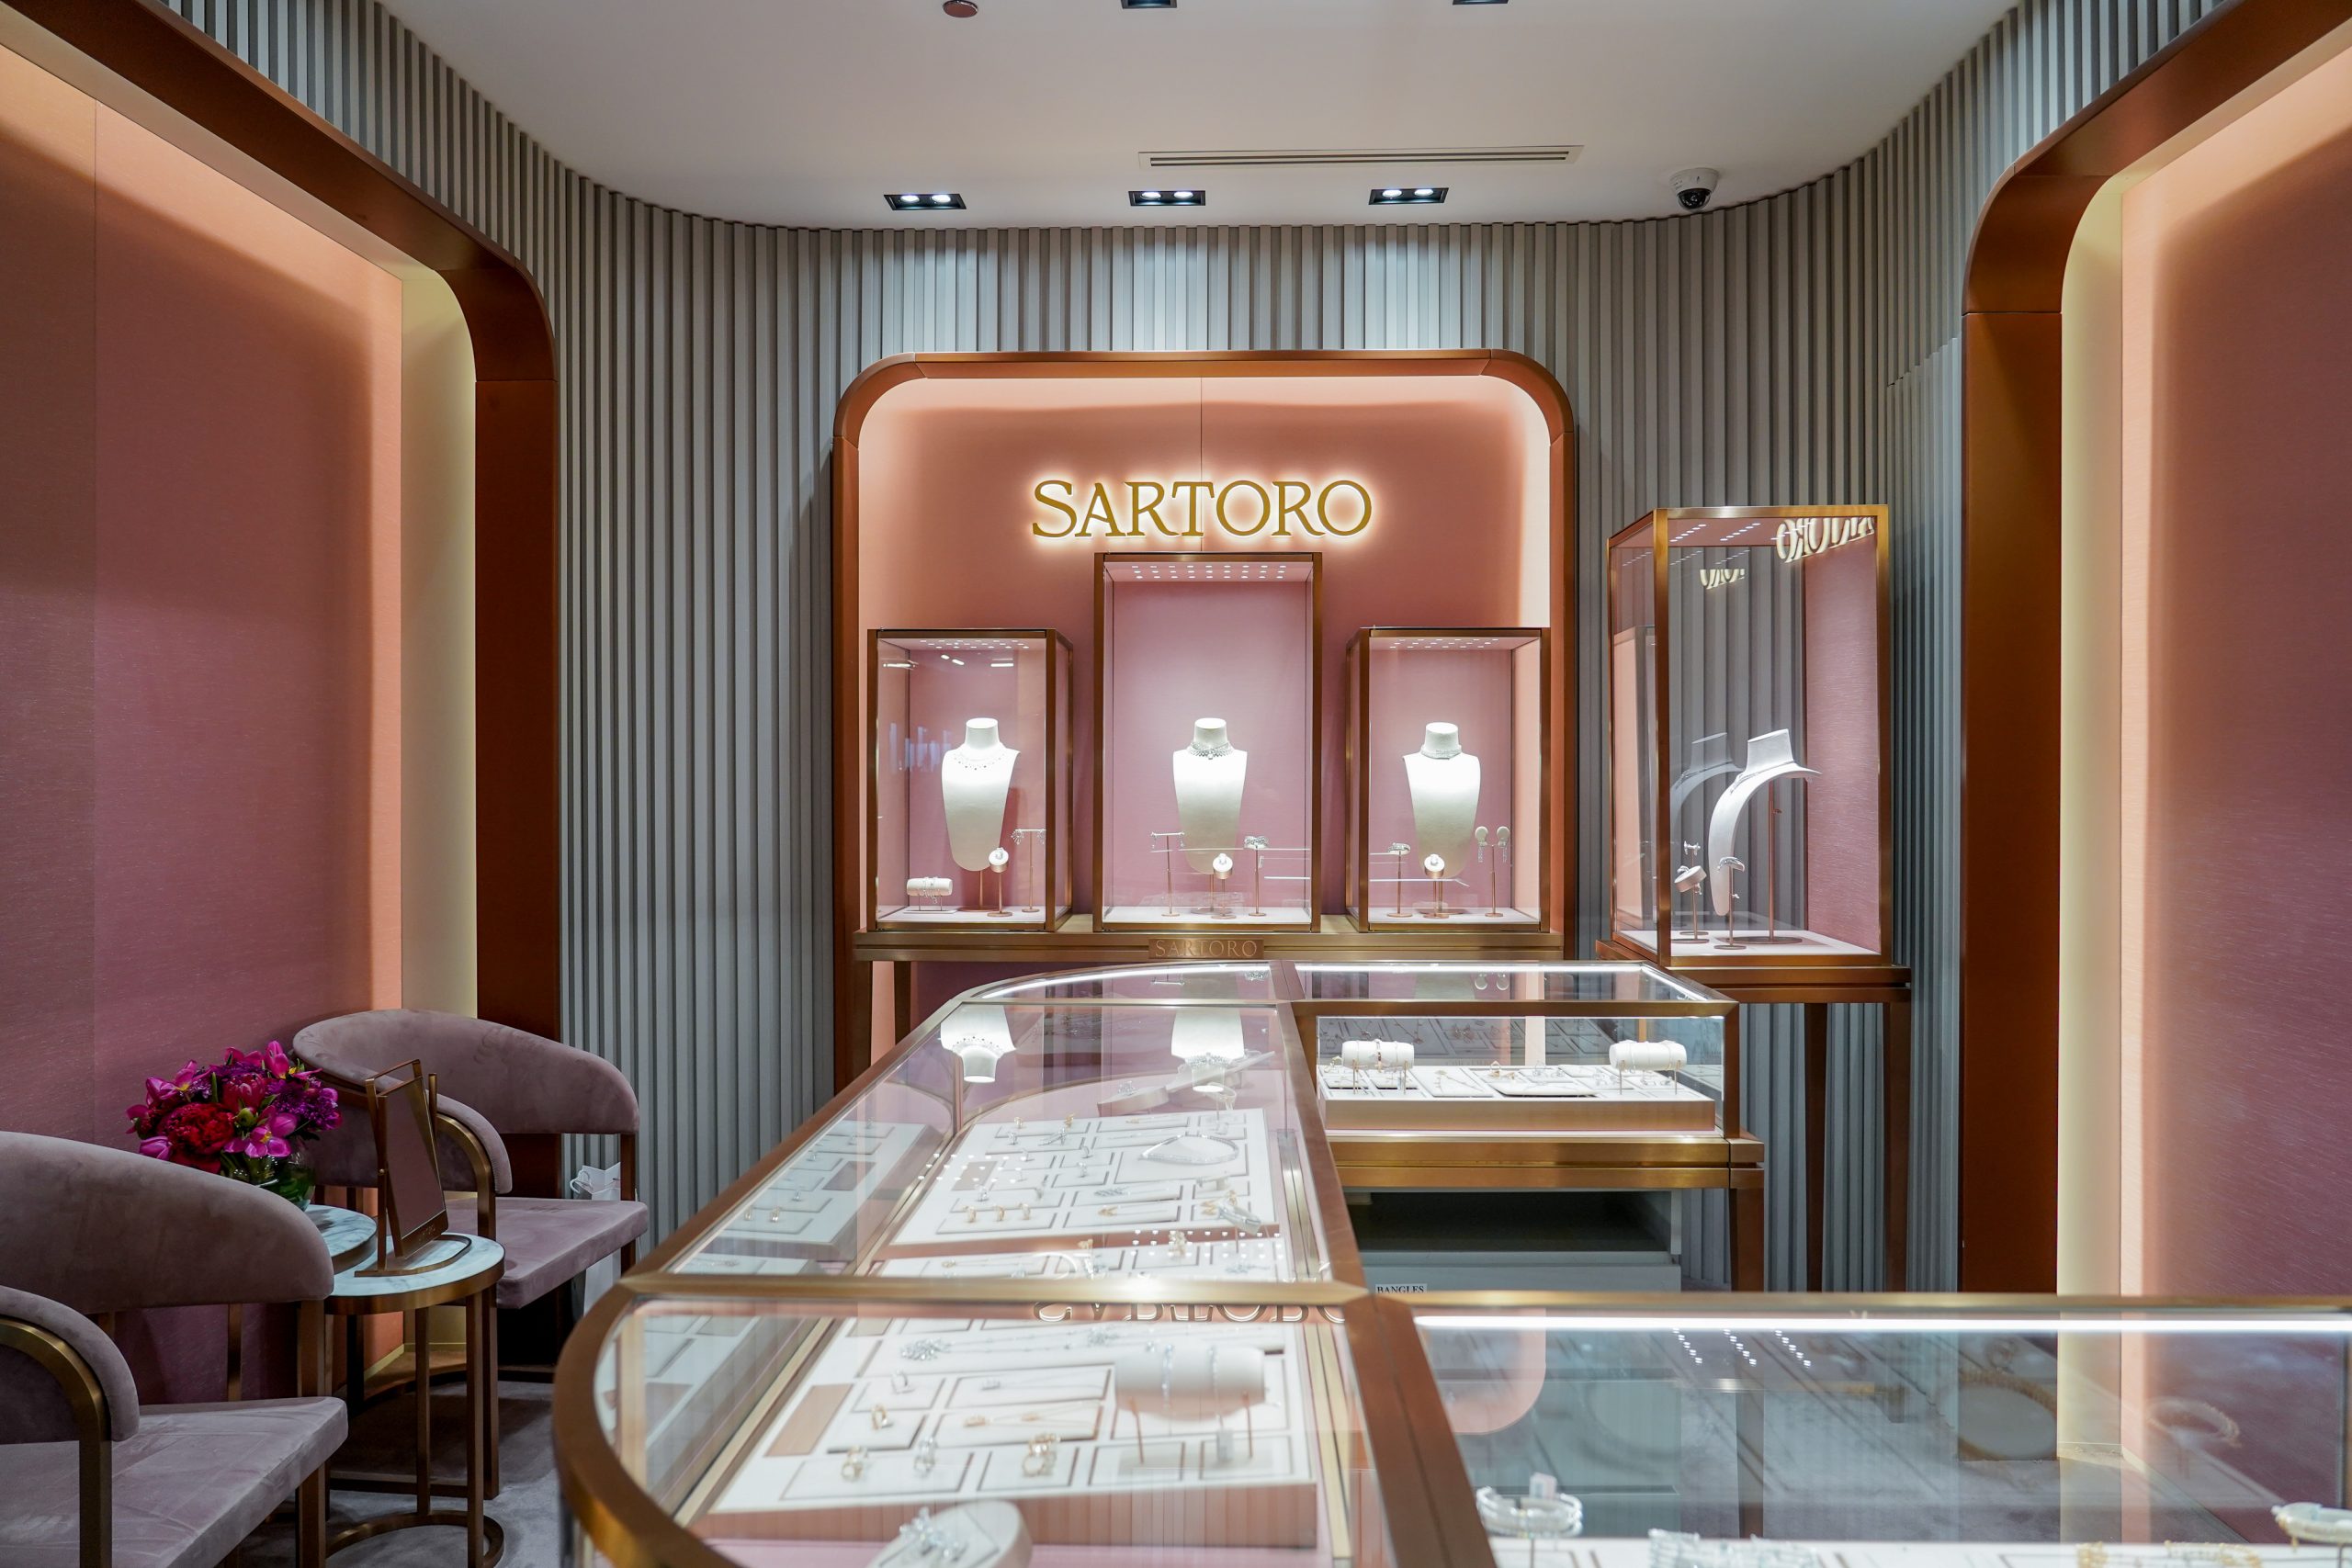 Maison Sartoro Genève hosts private viewing of their exclusive high jewellery collection at Al Fardan Jewellery’s boutique in Qatar